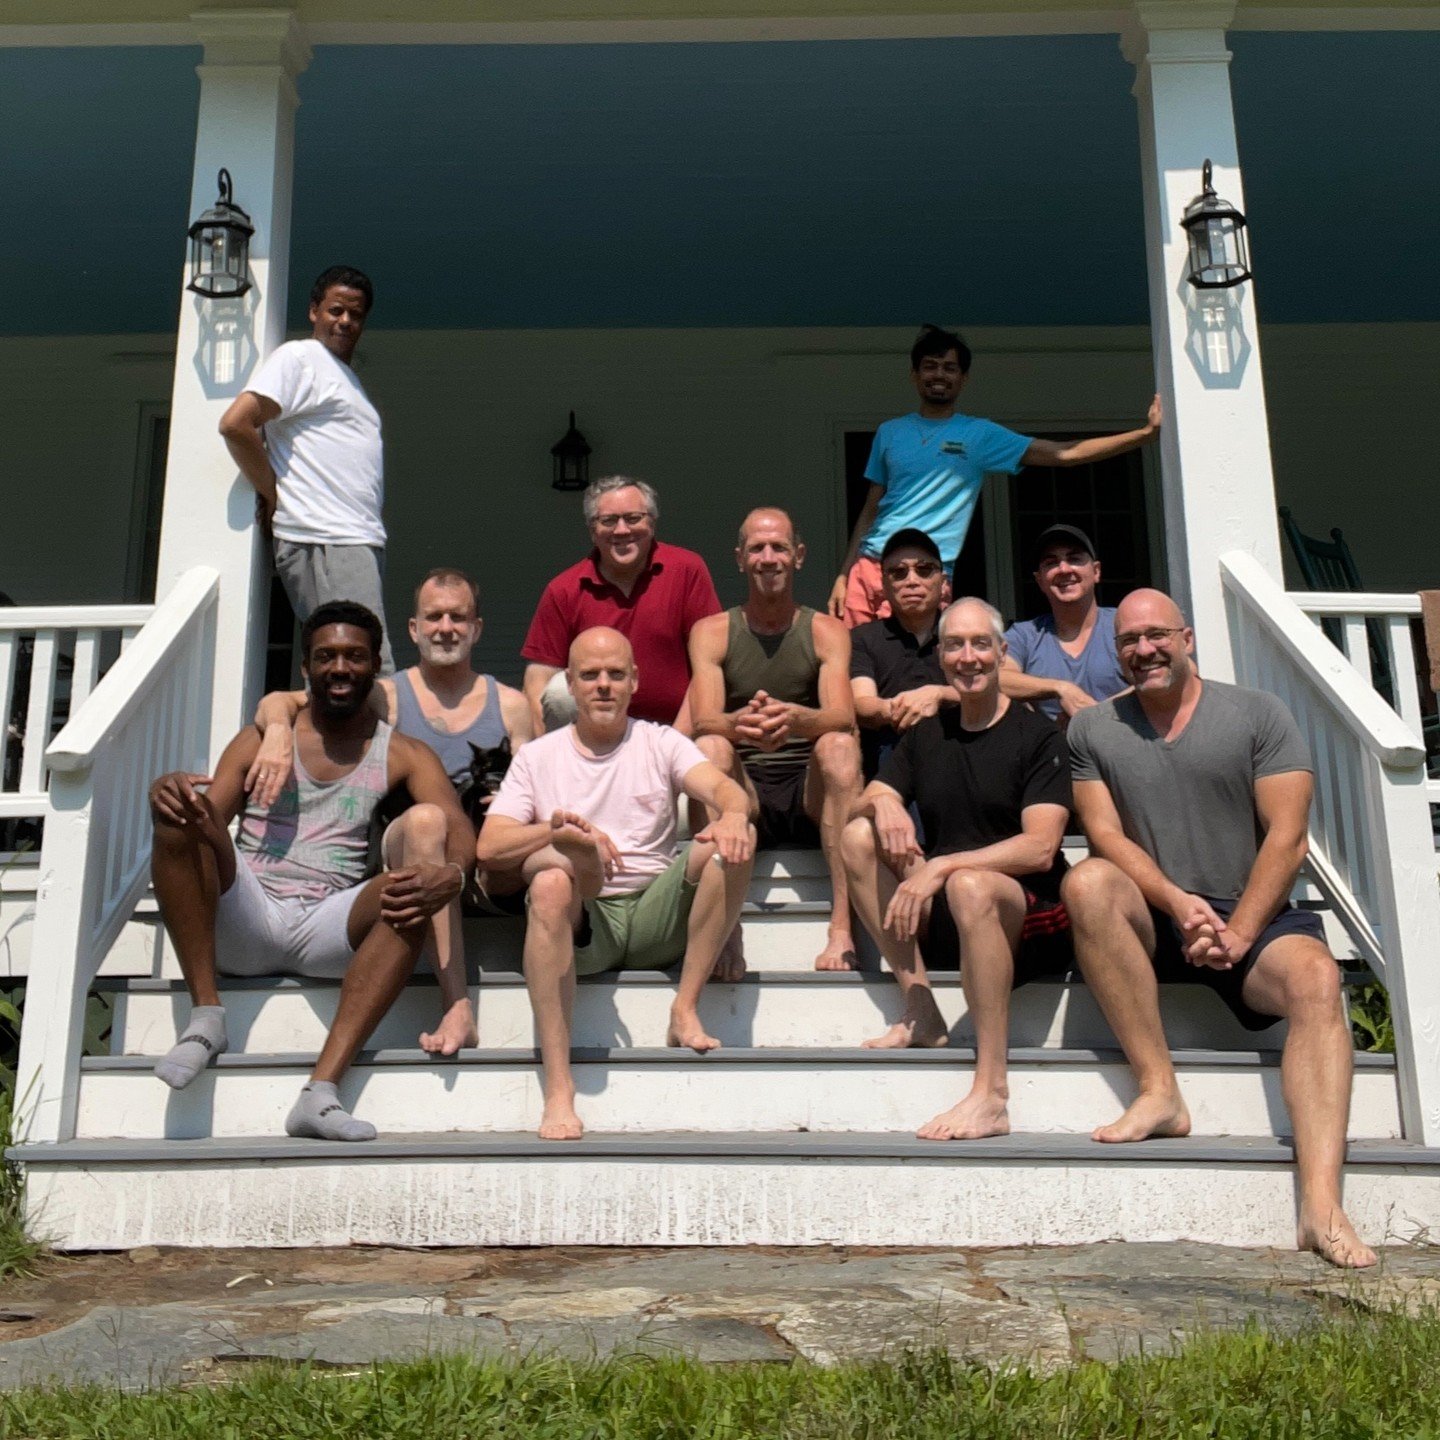 What are Willow&rsquo;s Gay and Bi Men&rsquo;s Gatherings all About?

We organize our gay and bi-men&rsquo;s gatherings to maximize the fun&mdash;the program varies from gathering to gathering. On these special weekends, we invite participants to off